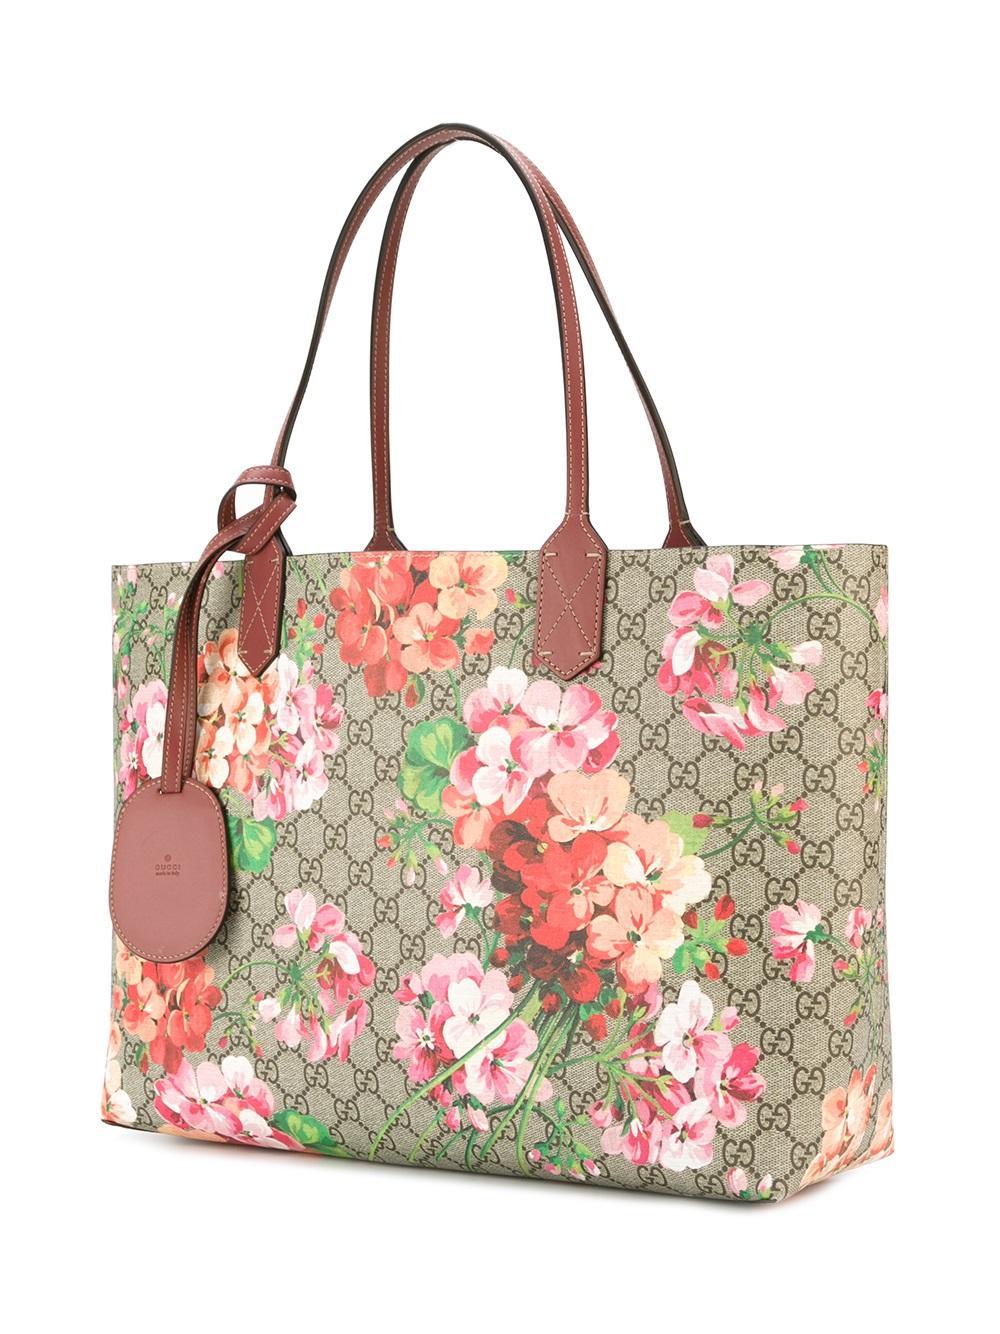 Lyst - Gucci Gg Blooms Supreme Tote Bag in Brown